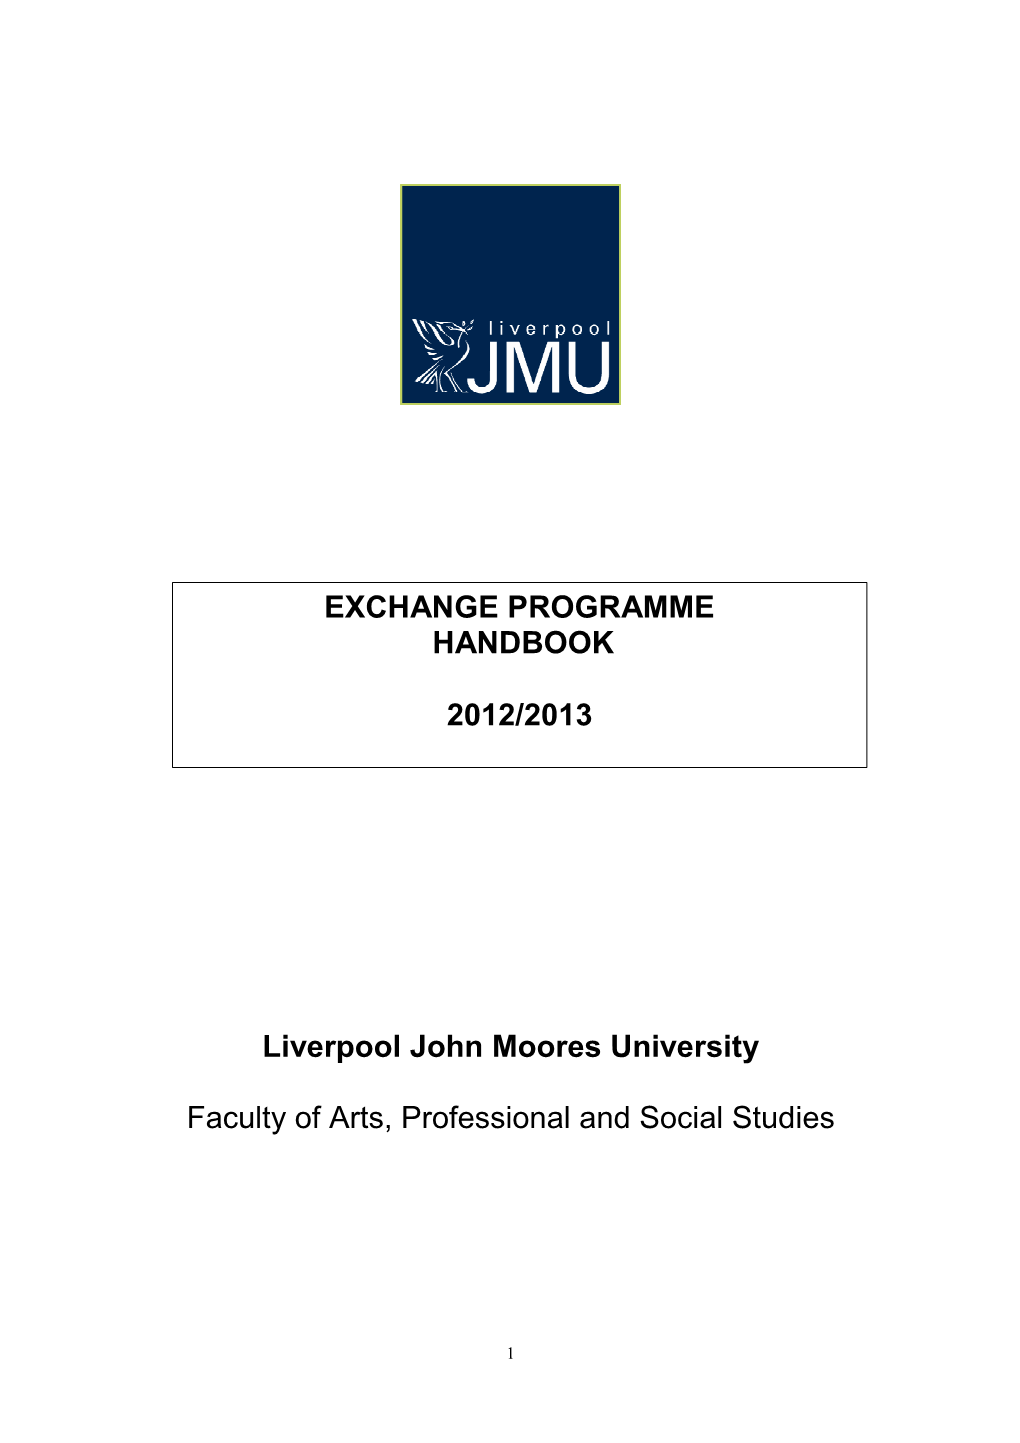 Liverpool John Moores University Faculty of Arts, Professional and Social Studies